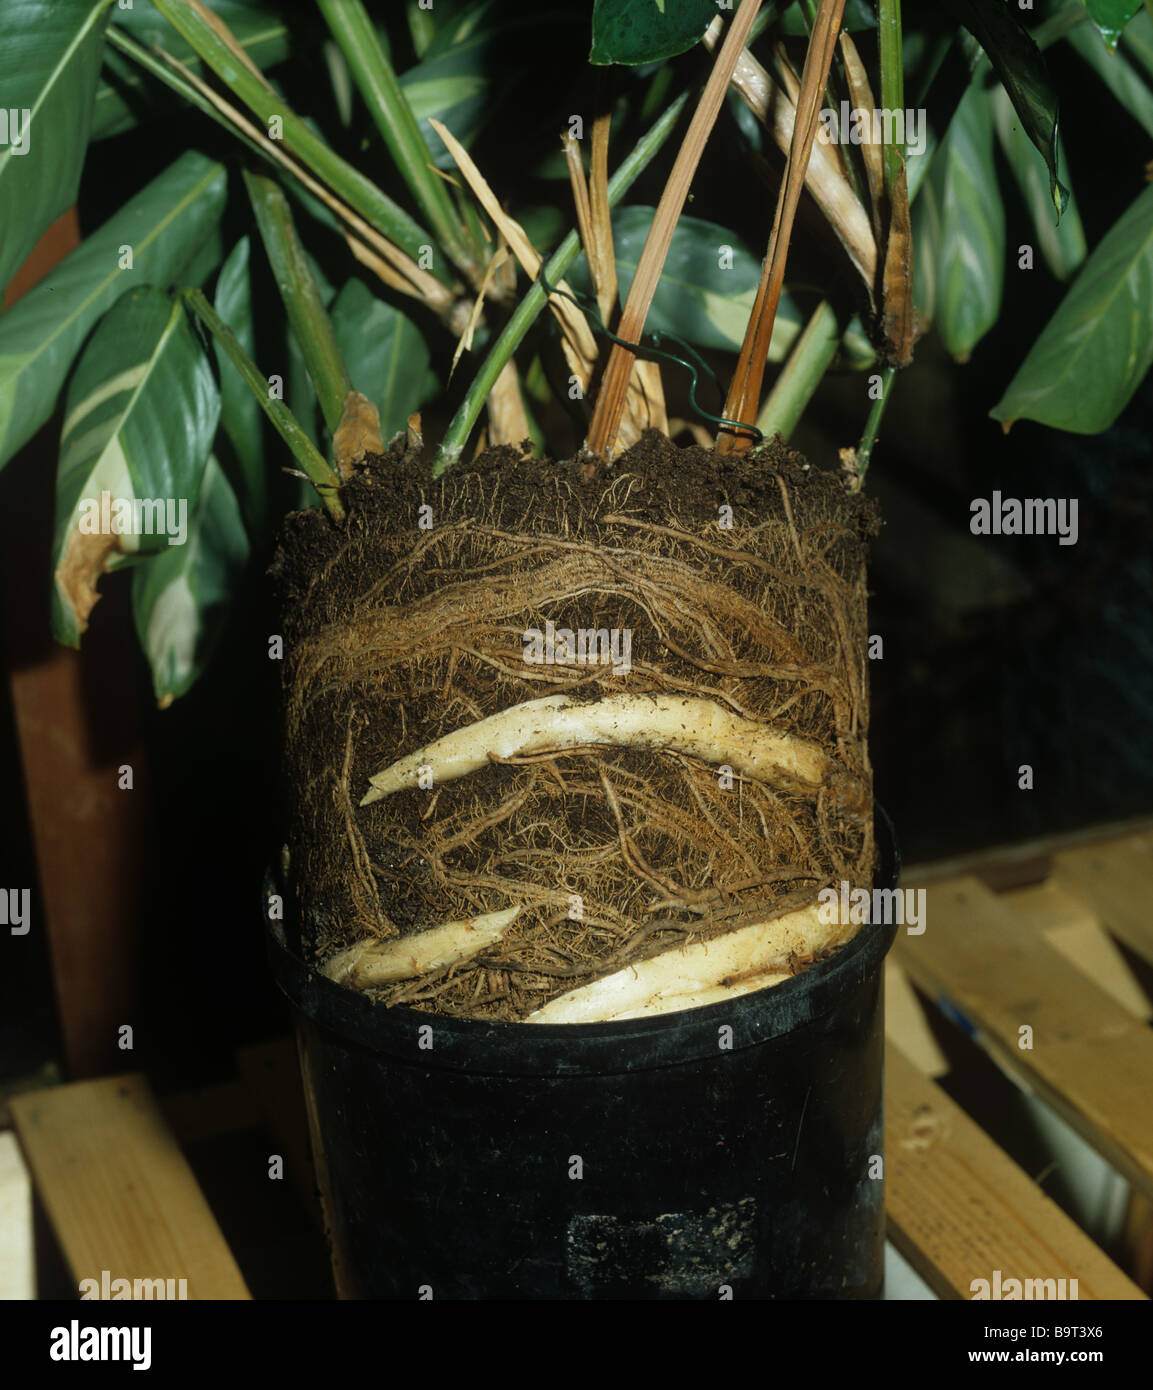 Pot bound Calathea lubbersii plant removed from its pot to show cramped root system Stock Photo